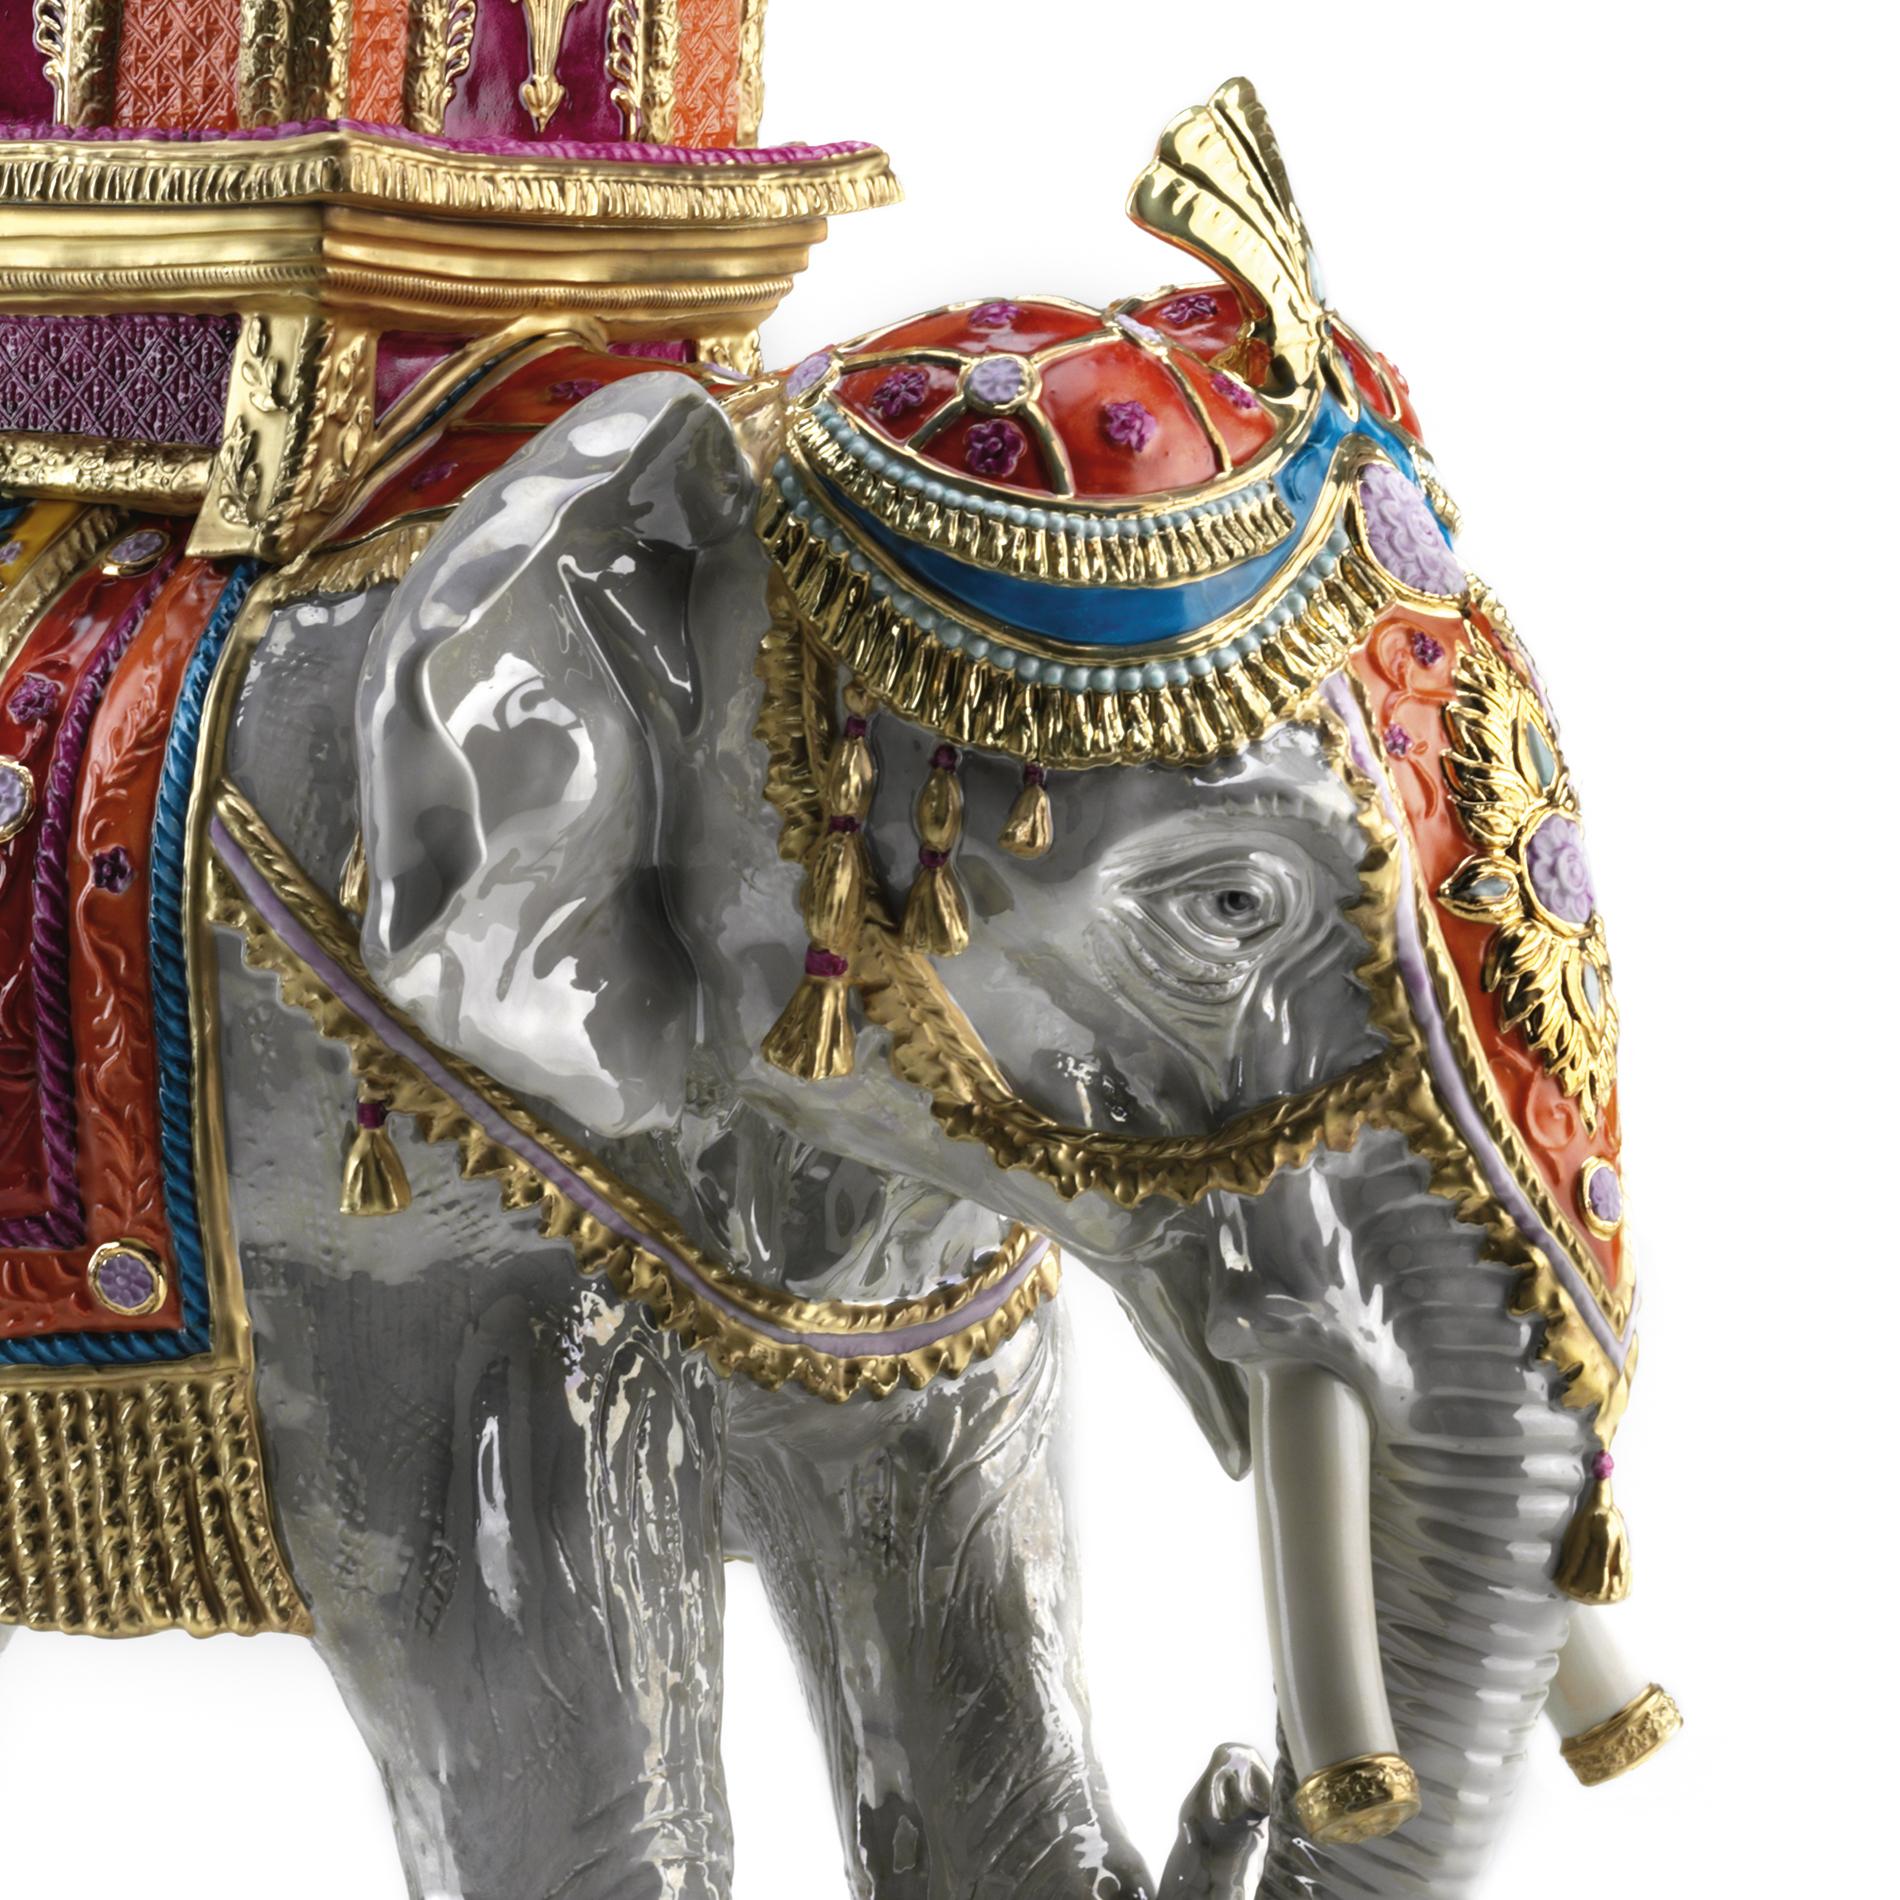 Sculpture Udaipur red elephant in handcrafted
porcelain, hand painted porcelain. With 24-karat gold-
plated details.